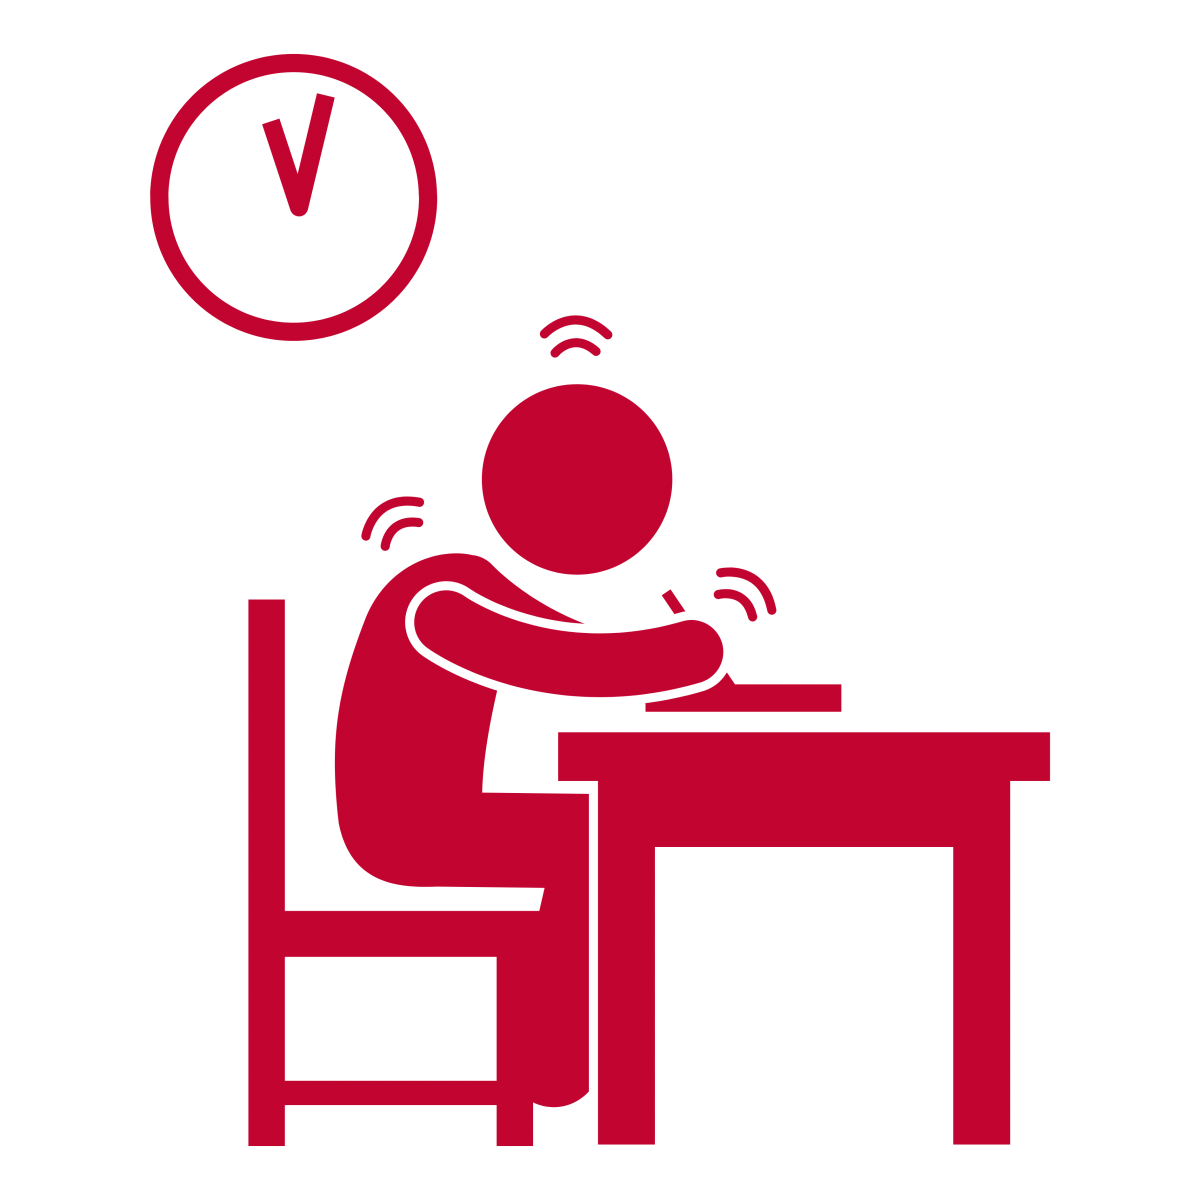 A student sitting at a desk writing an exam with a clock in the corner.